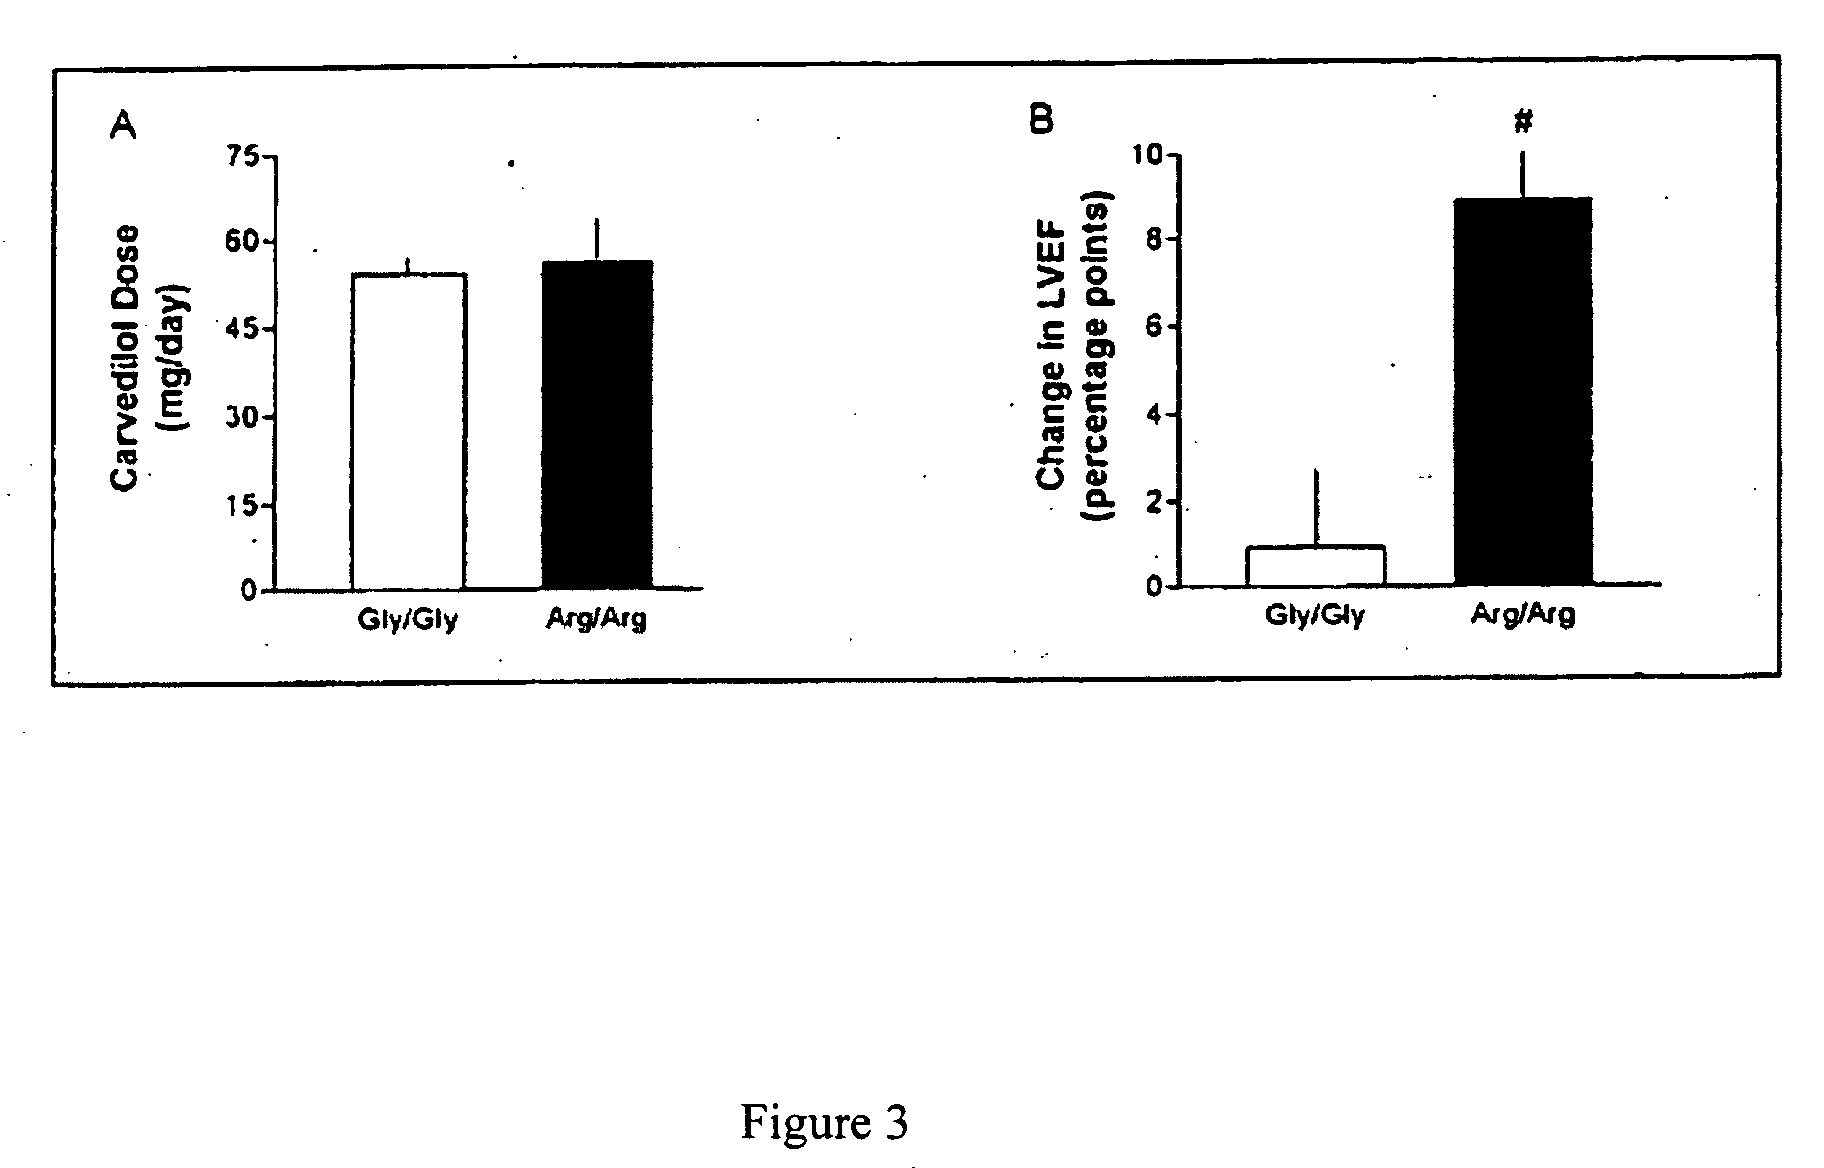 Methods for diagnosis, prediction and treatment of heart failure and other cardiac conditions based on beta1-adrenergic receptor polymorphism